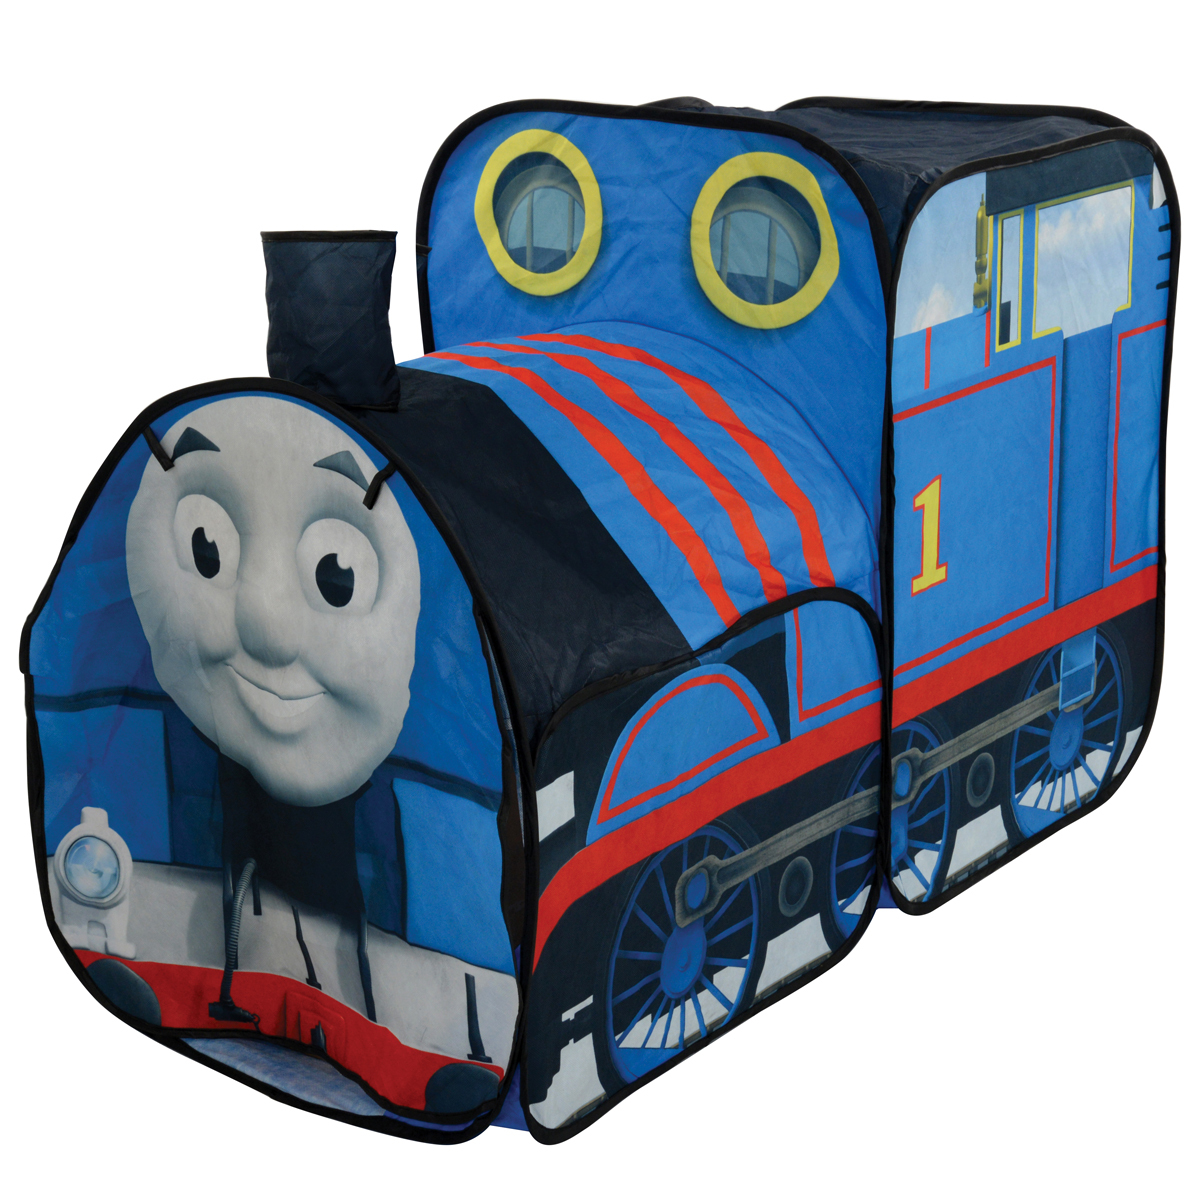 Thomas the Tank Engine 3D Pop-Up Tent | Early Learning Centre